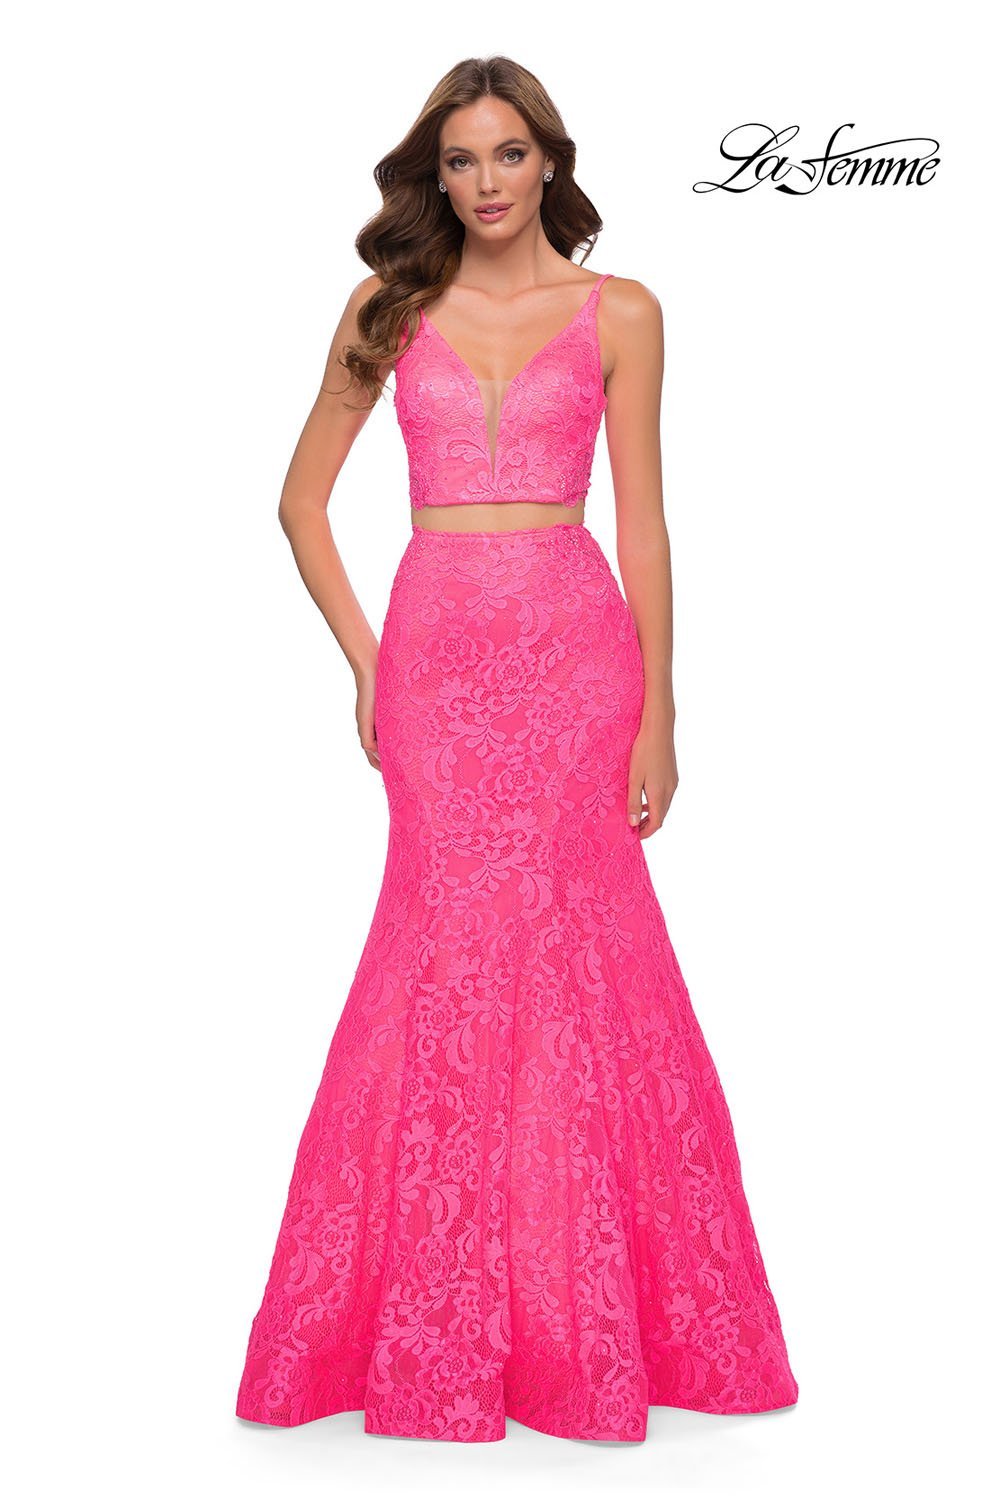 La Femme 29967 dress images in these colors: Neon Pink.